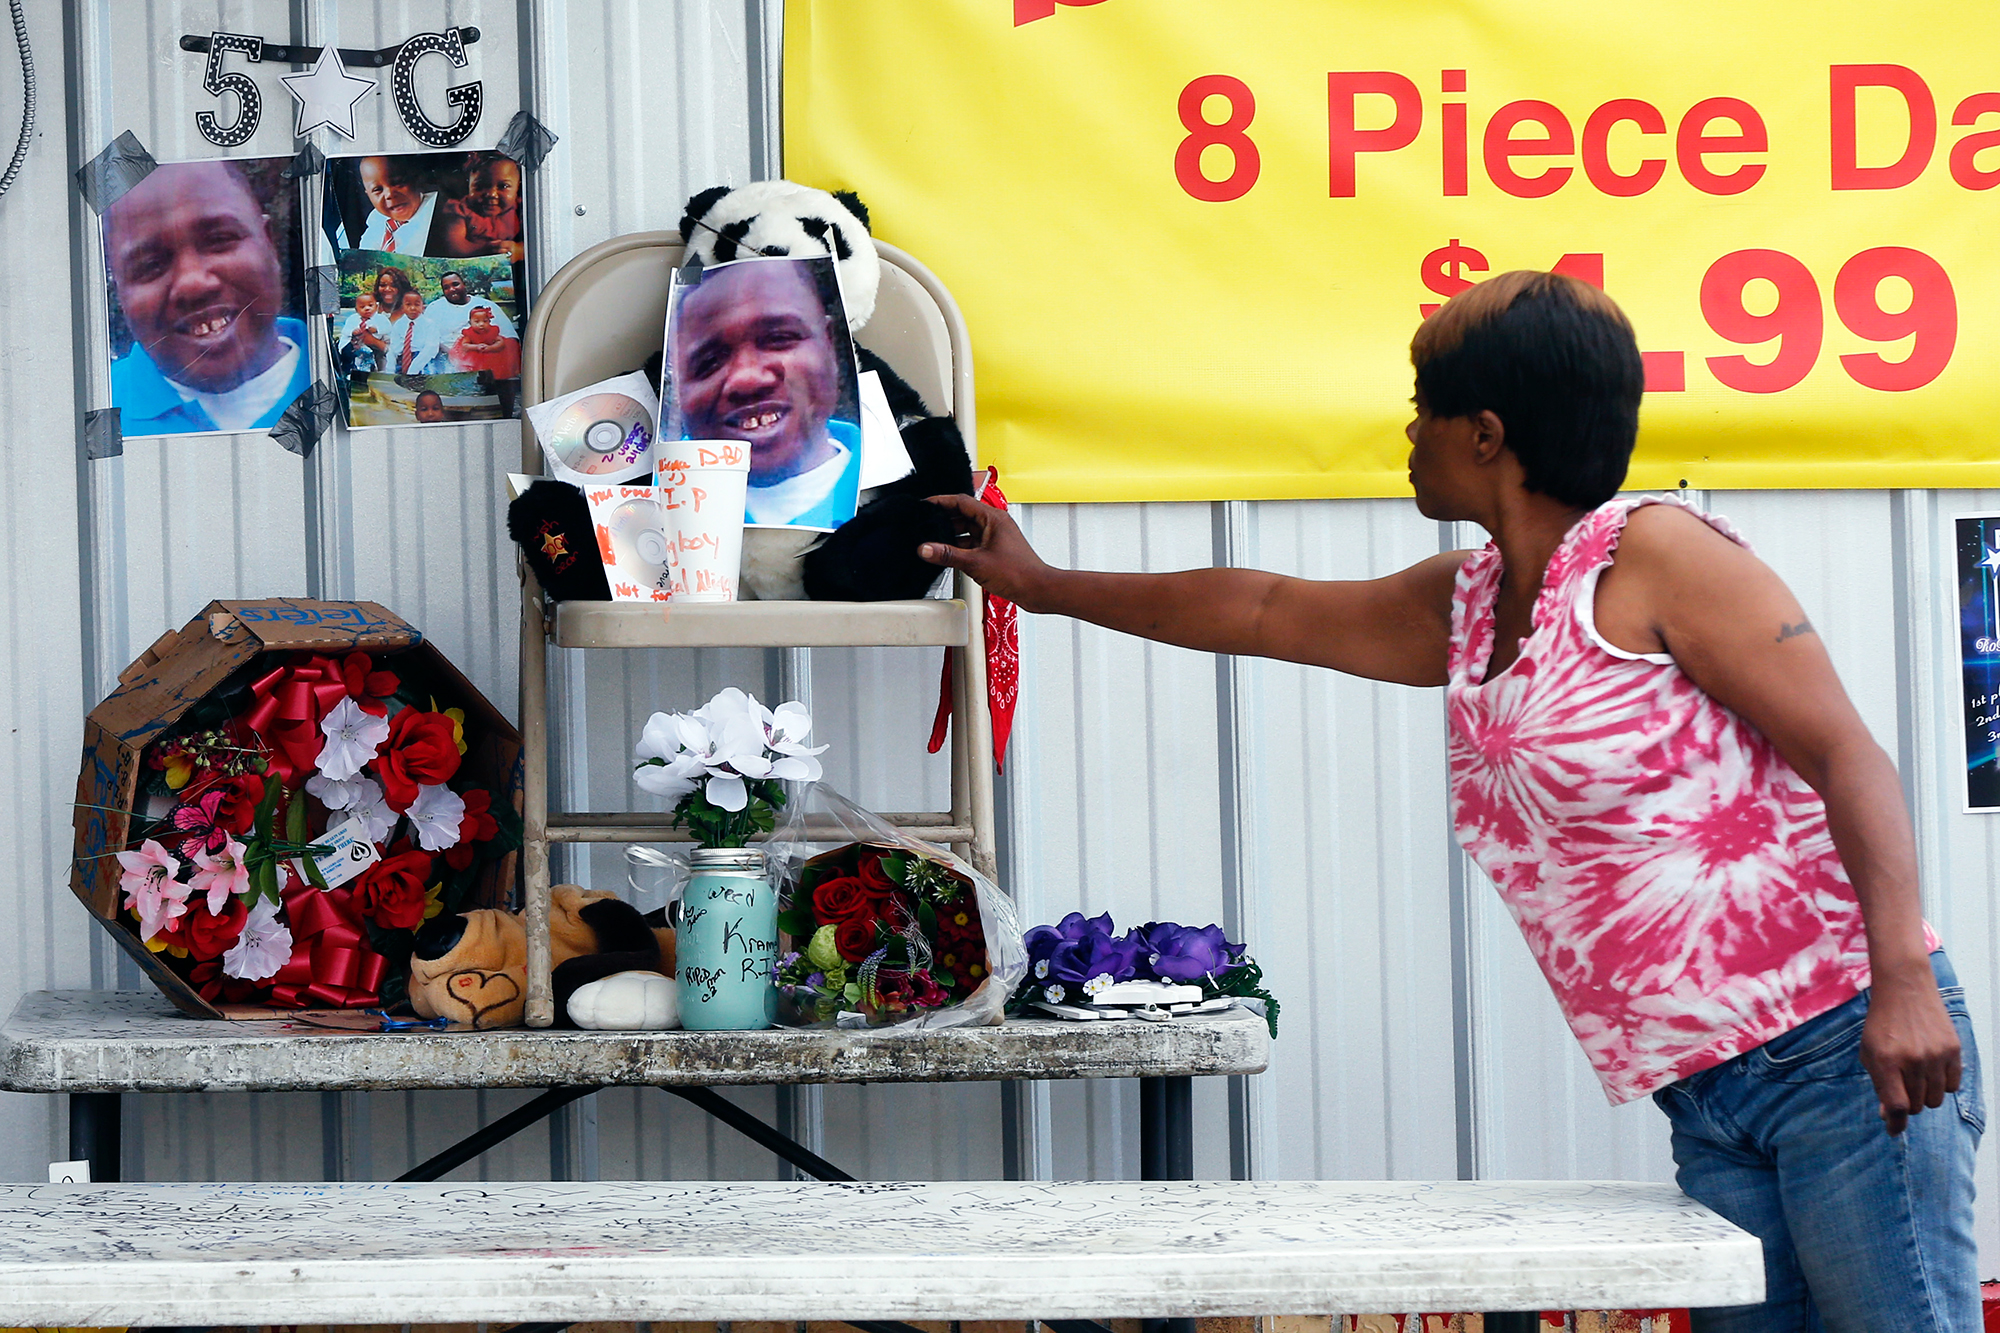 Nishka Johnson touches a makeshift memorial for Alton Sterling, in Baton Rouge, La., on July 6, 2016.